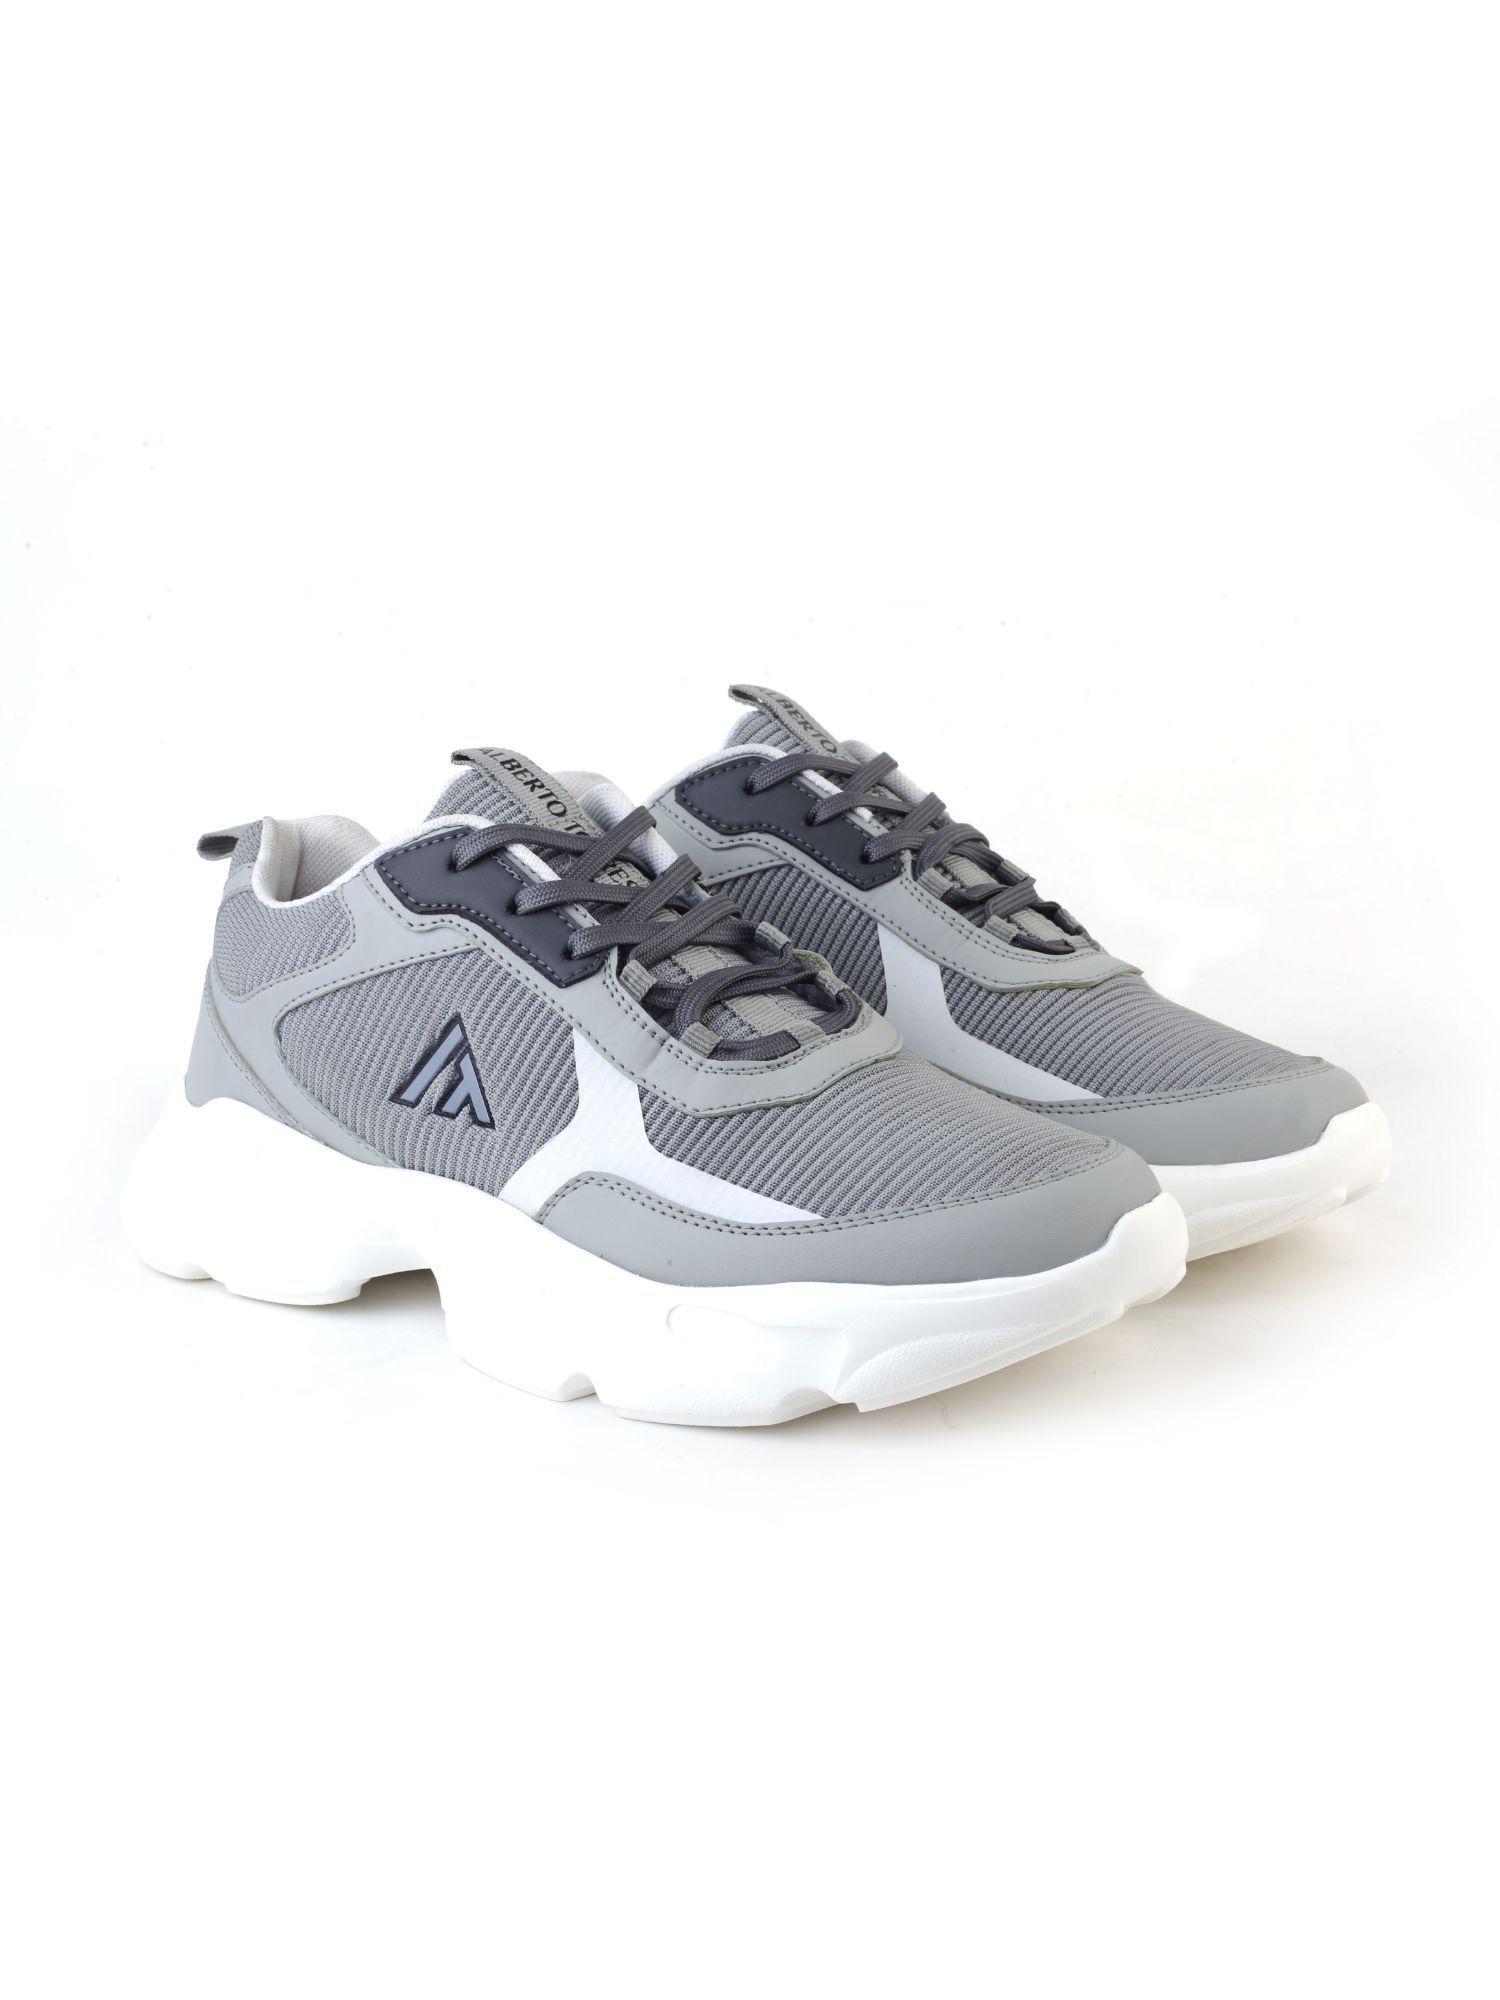 solid-grey-running-shoes